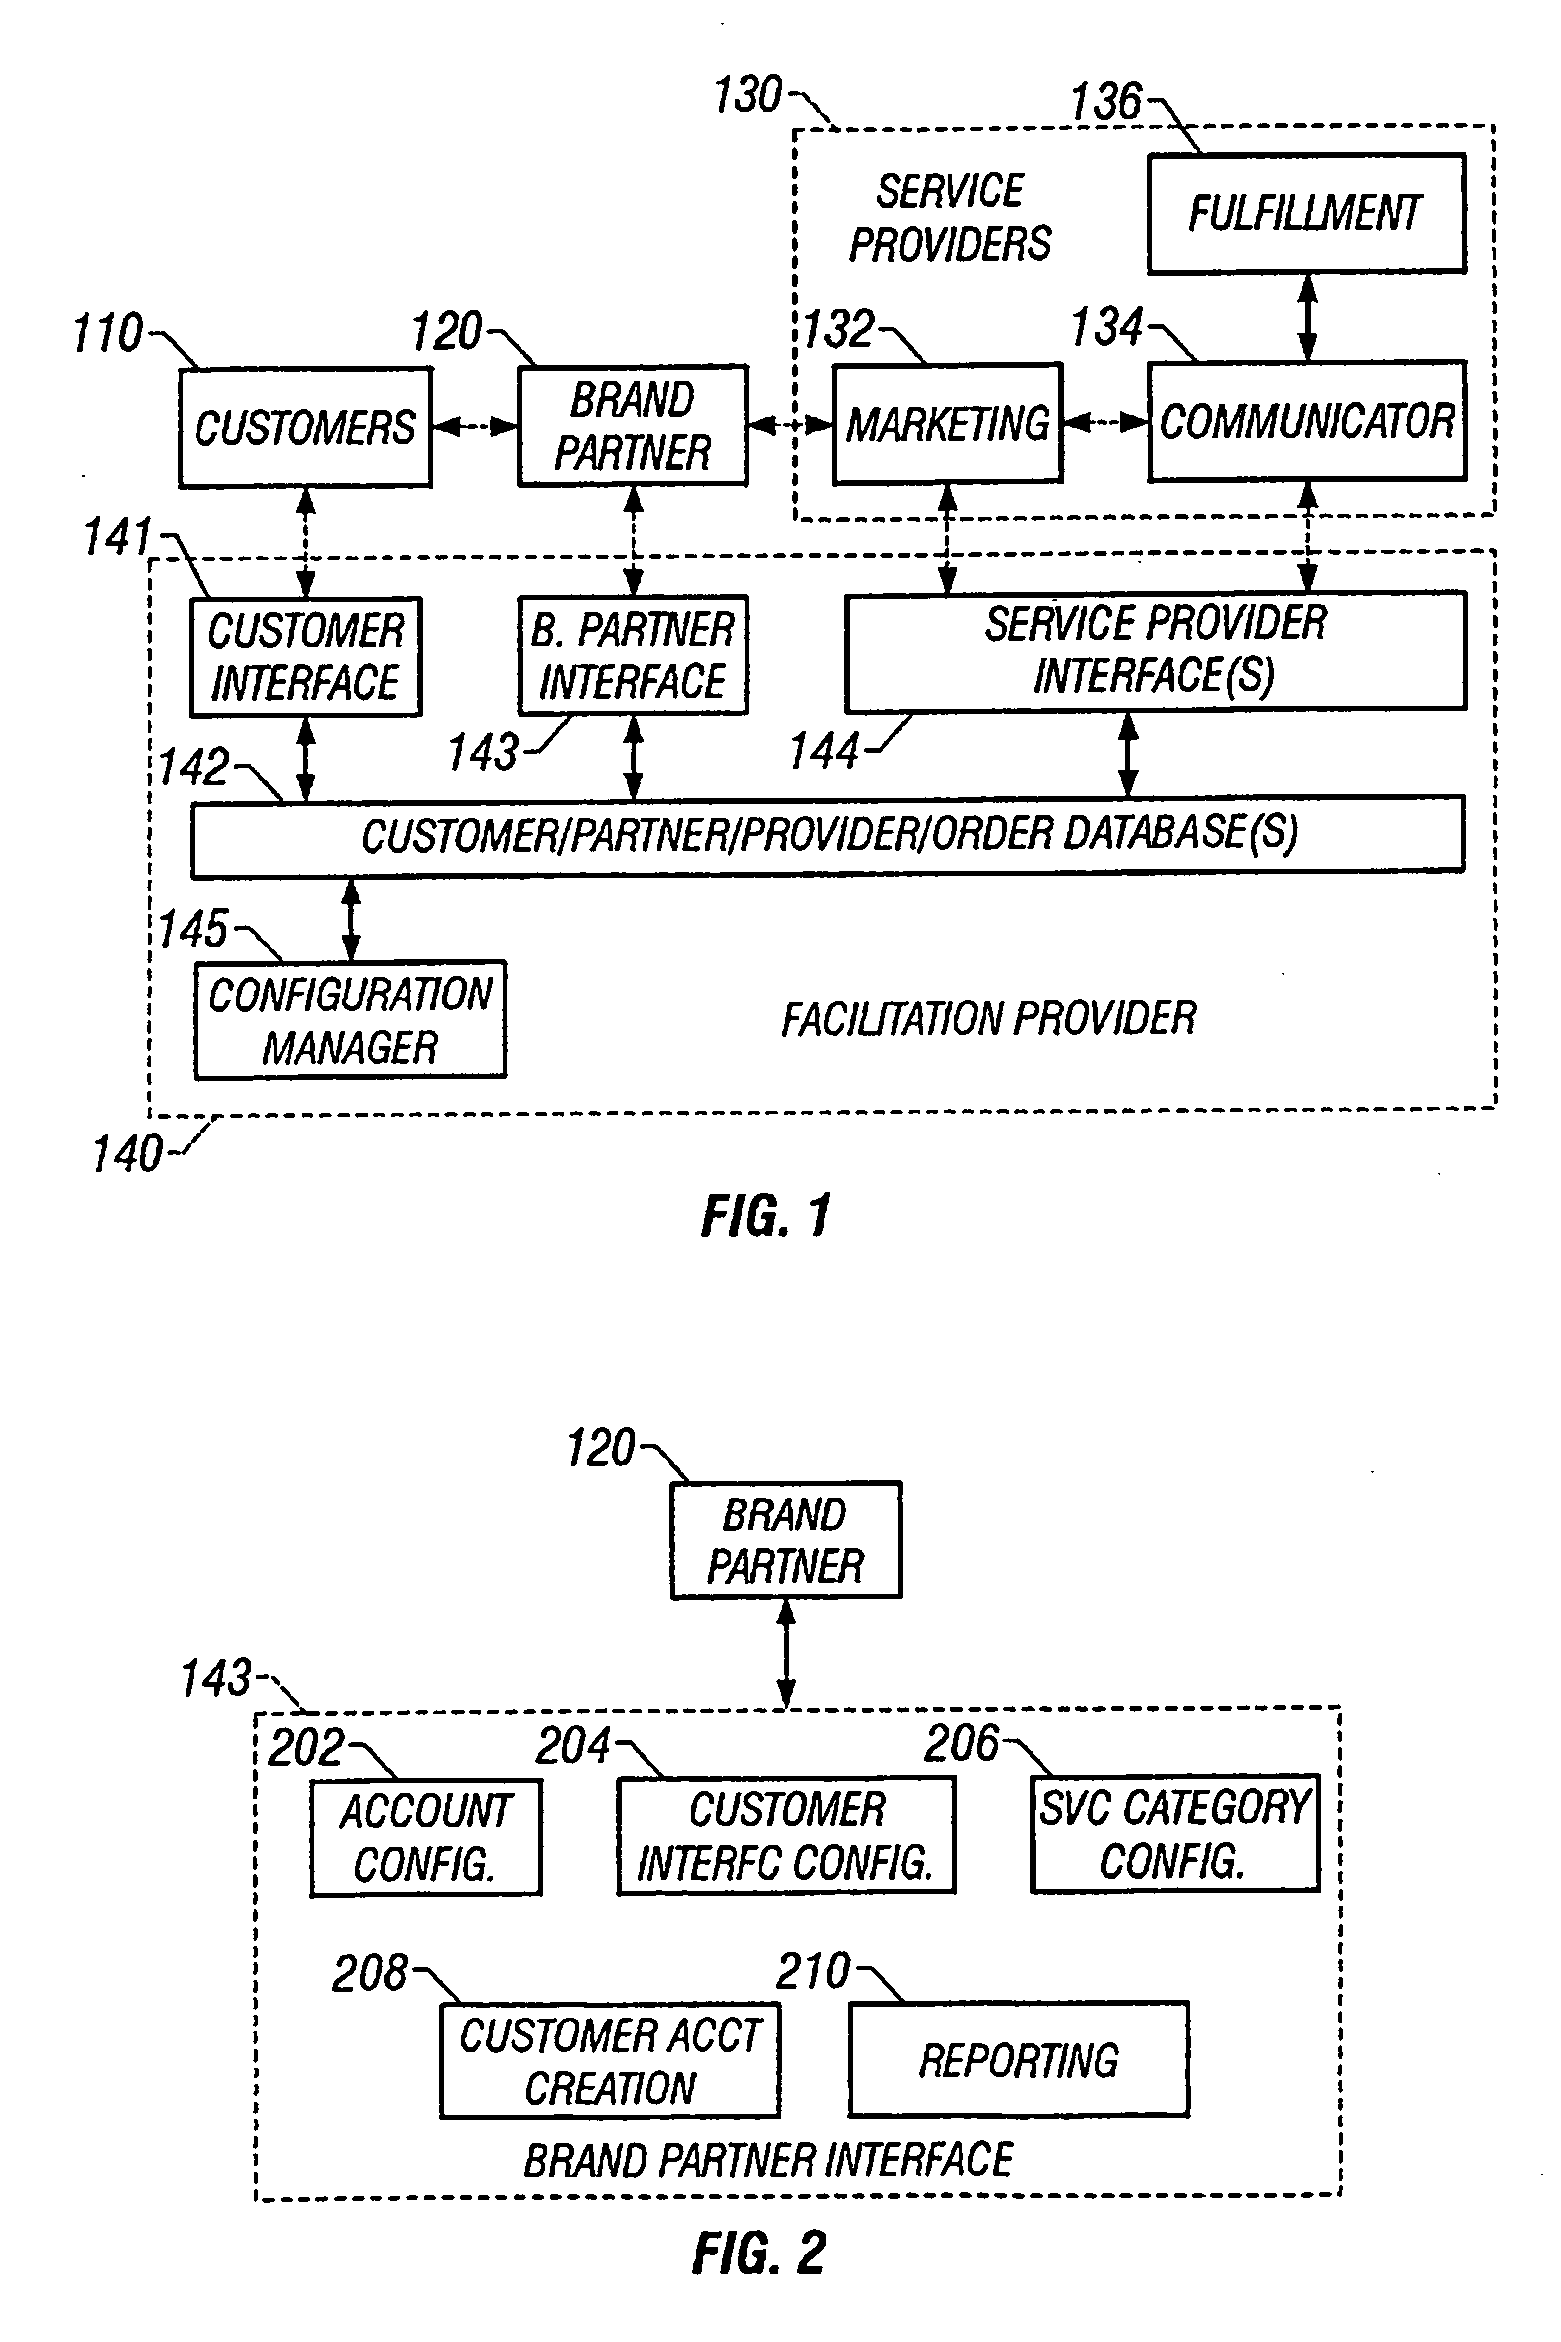 Method and apparatus for facilitating electronic acquisition and maintenence of goods and services via the internet